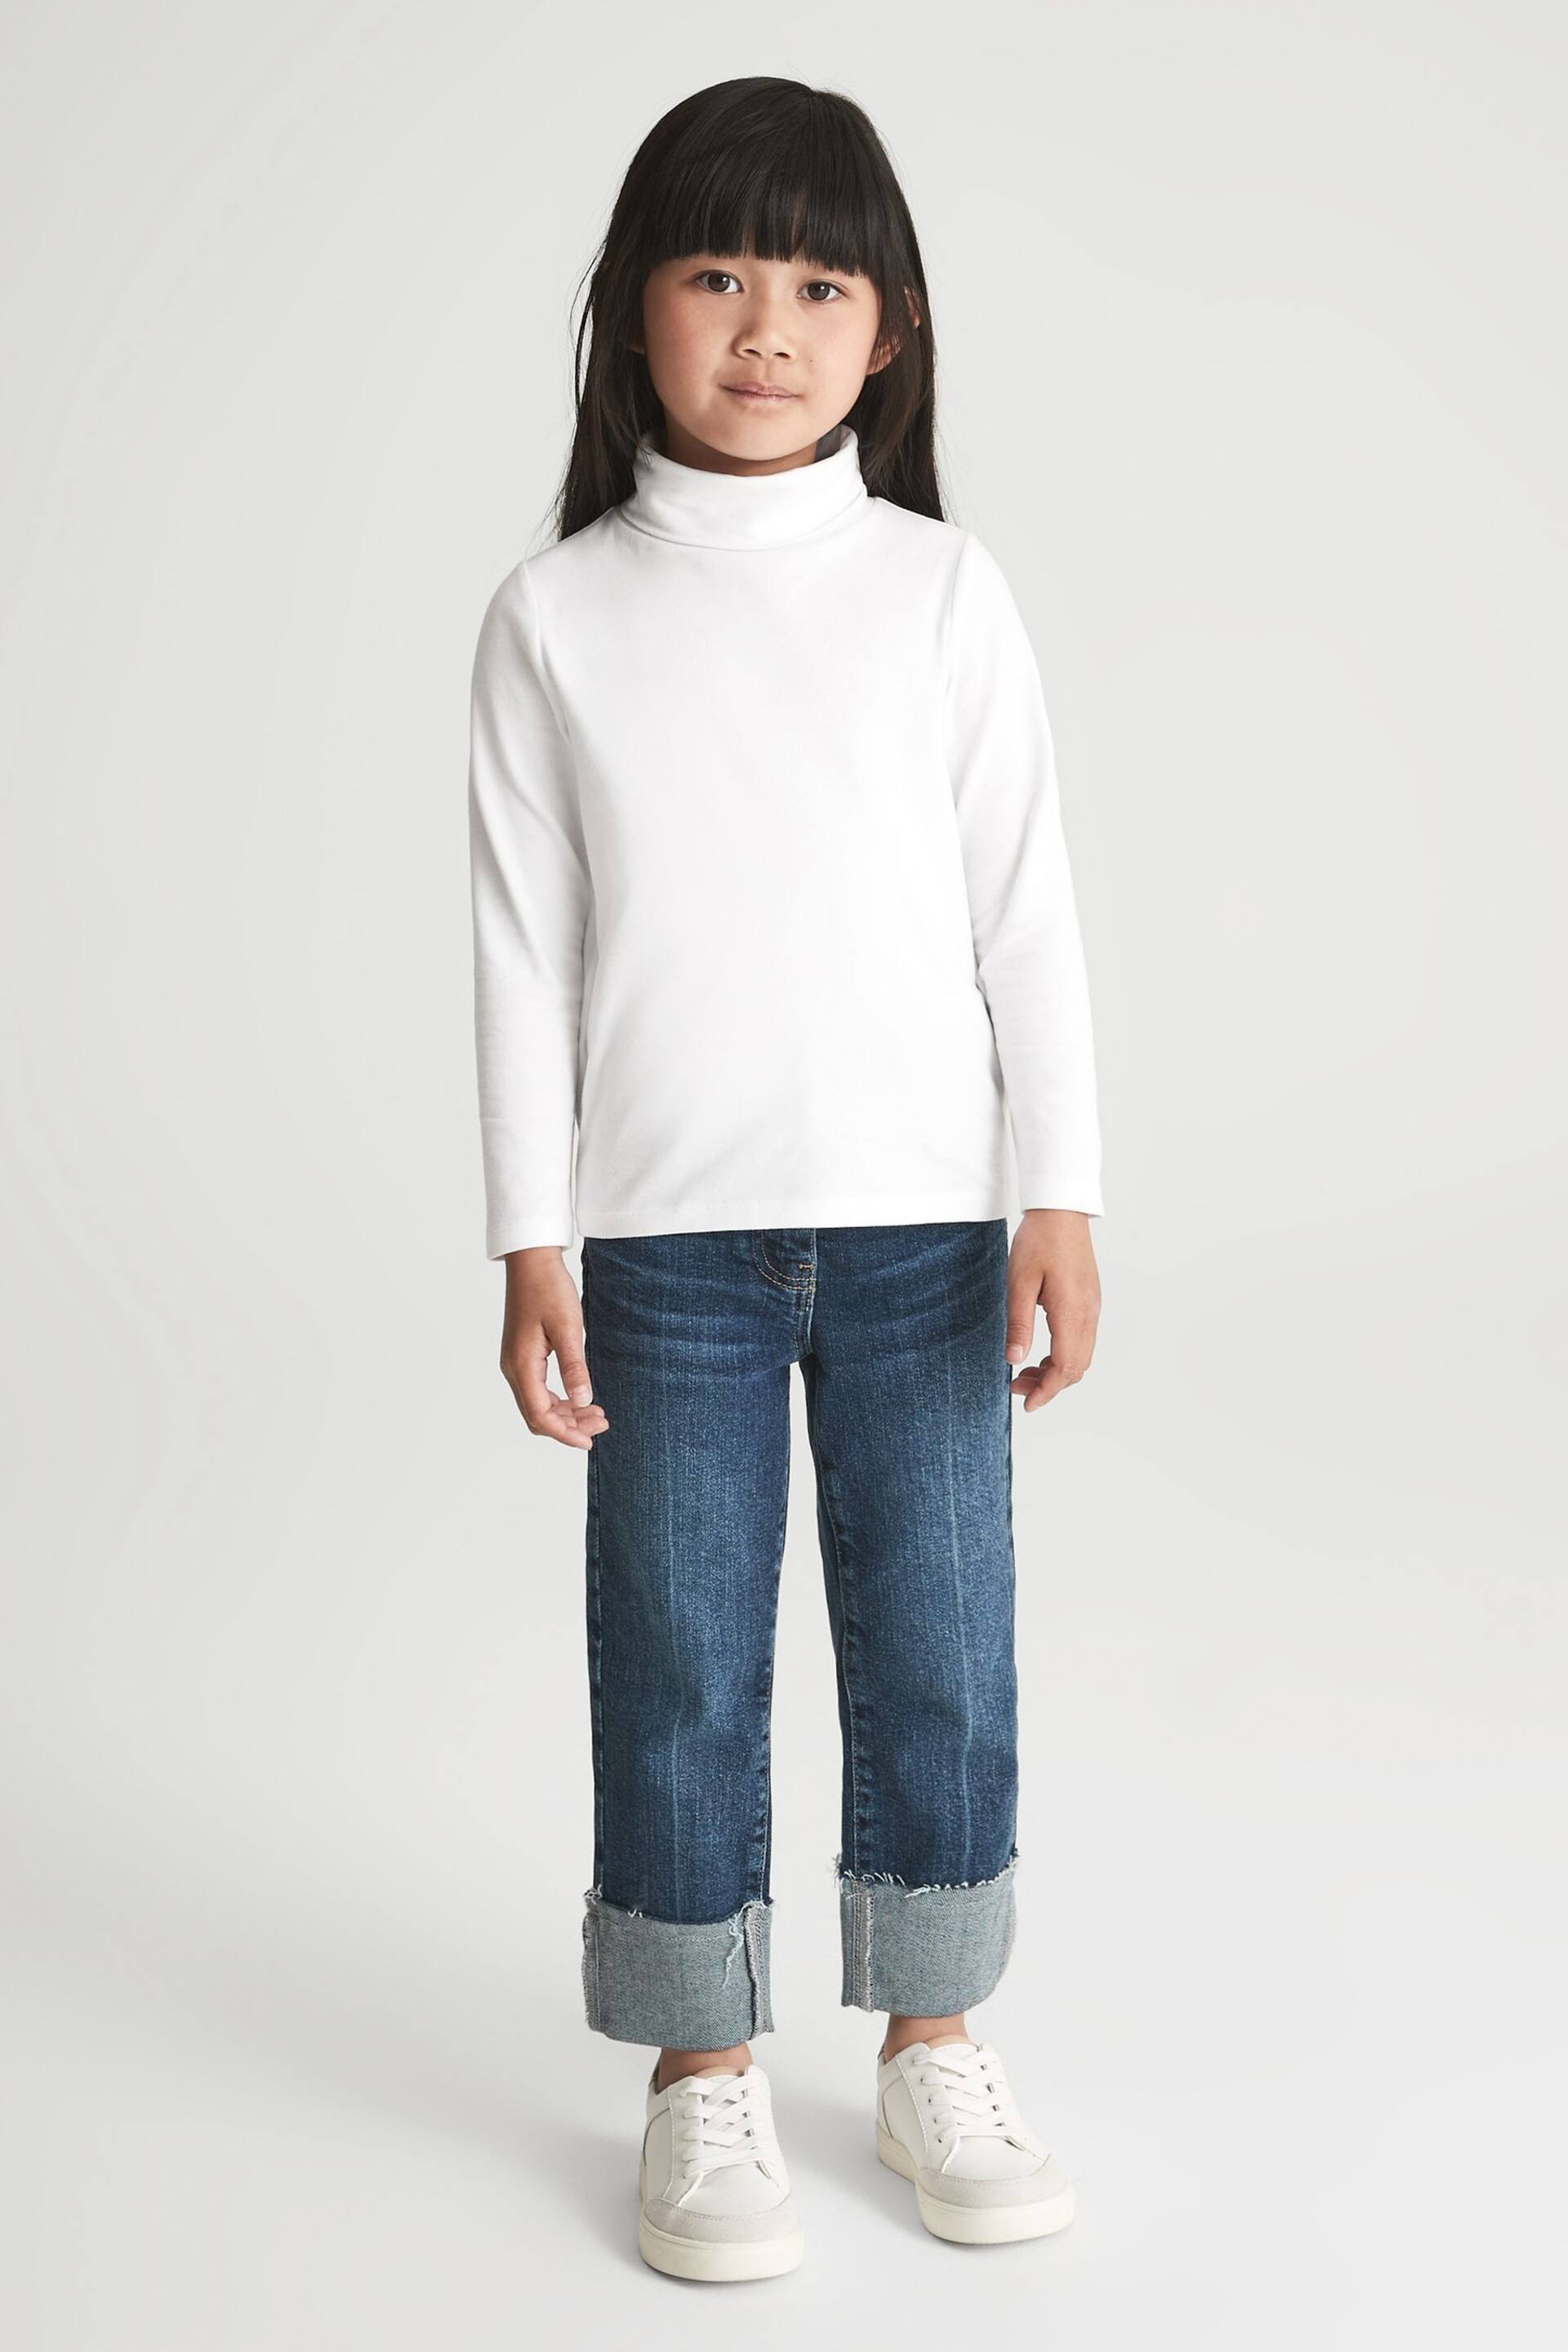 Reiss Ivory Carey Senior Cotton Blend Roll Neck Top - Image 1 of 8